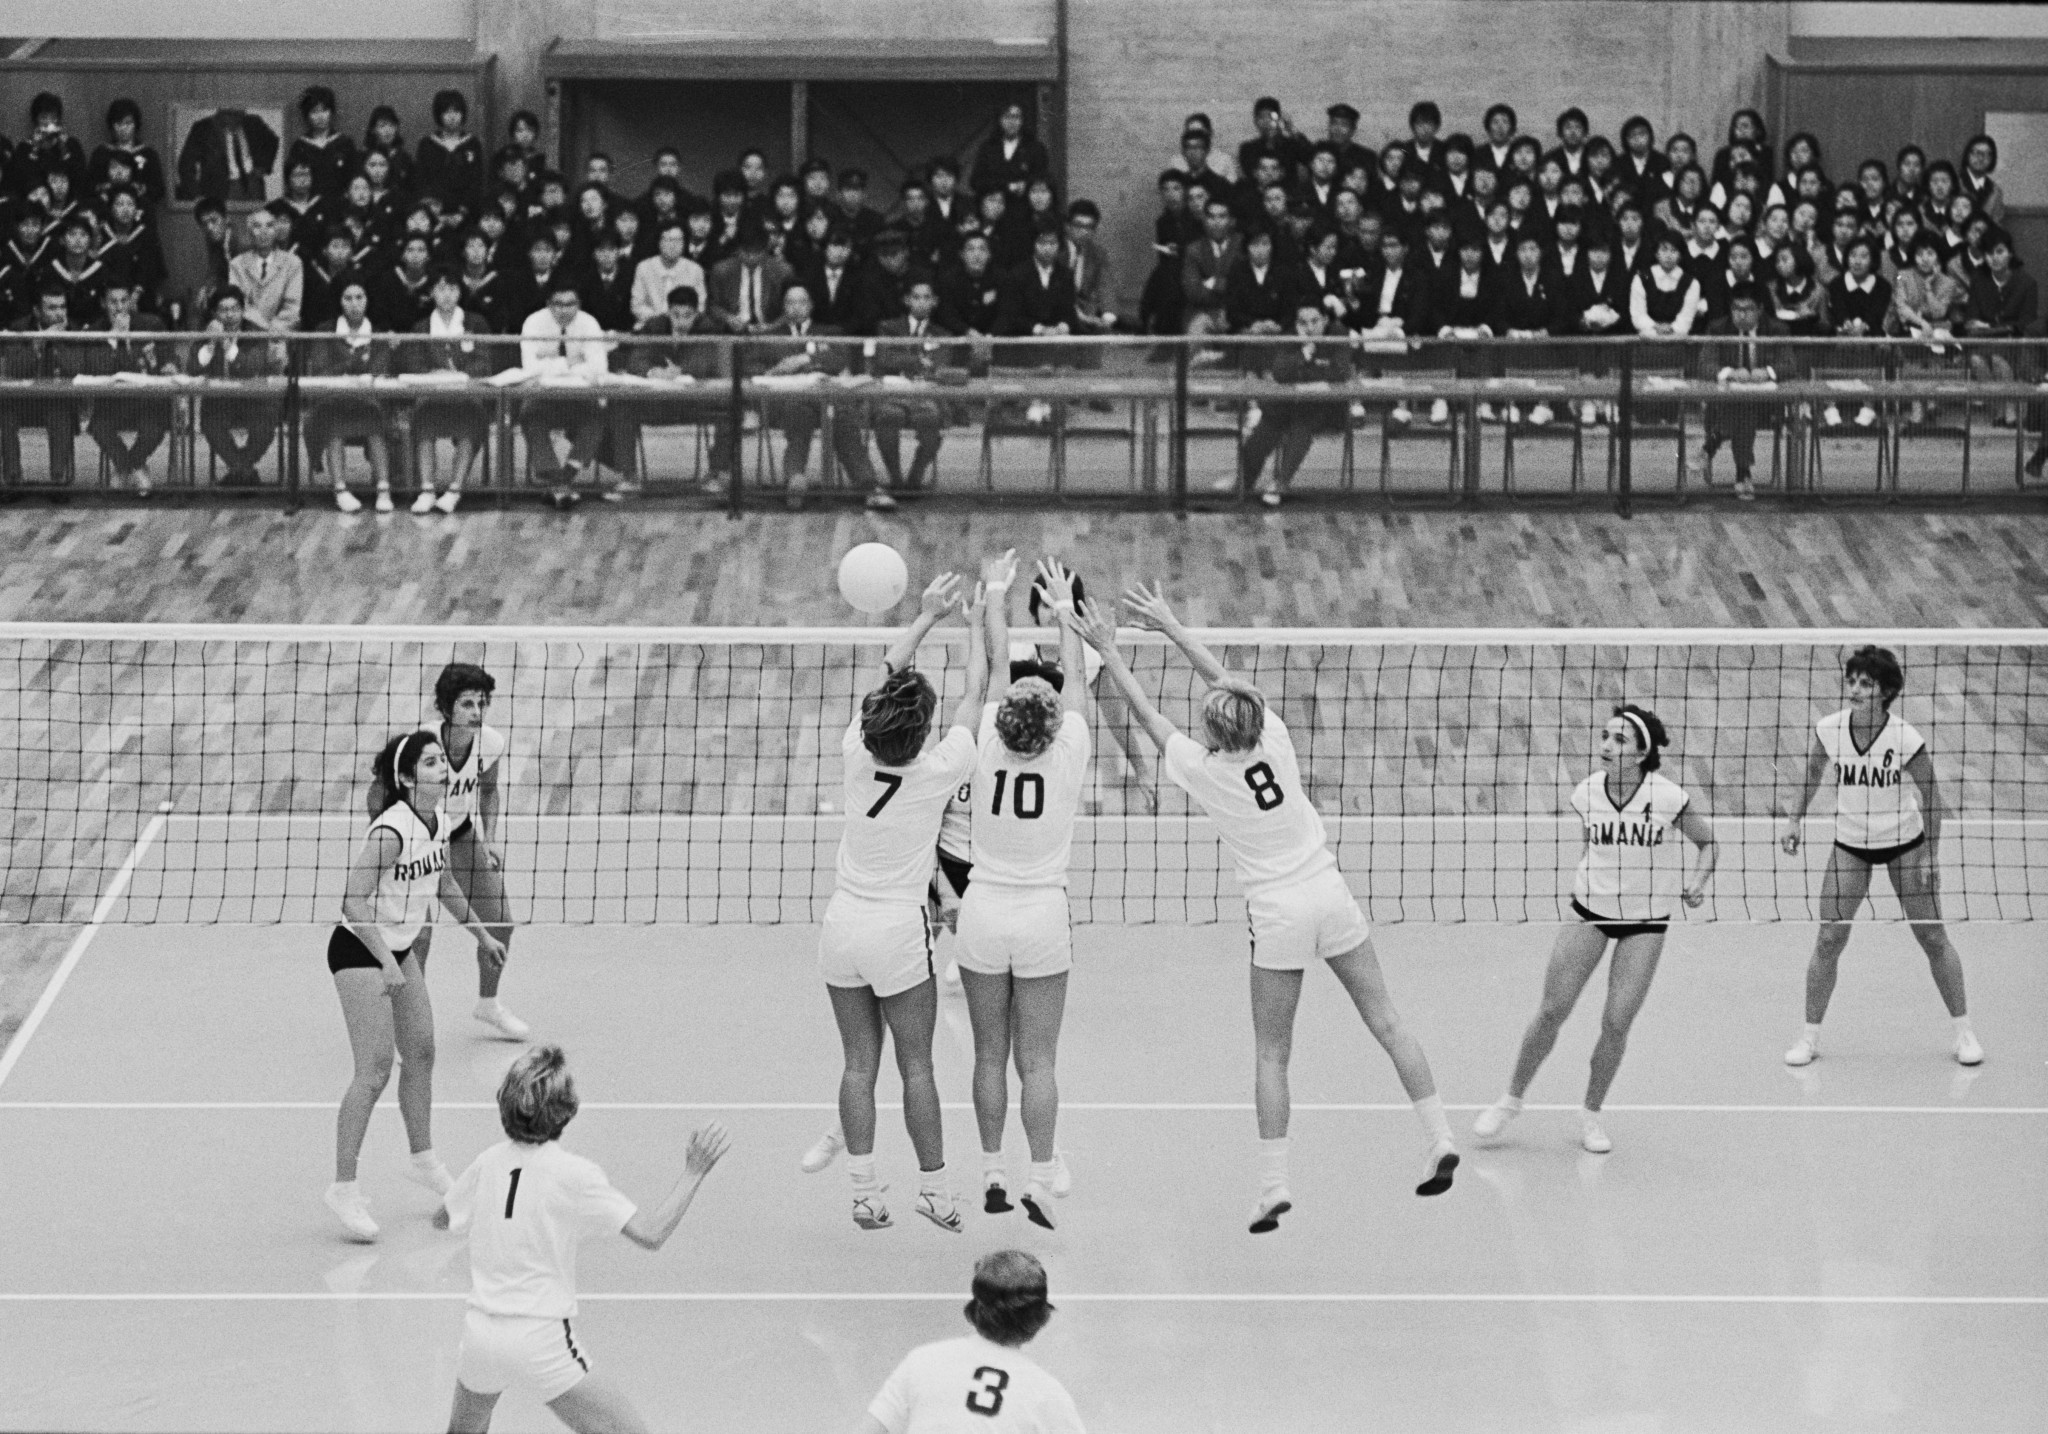 Volleyball was first introduced to the Olympic programme at the 1964 Games in Tokyo ©Getty Images